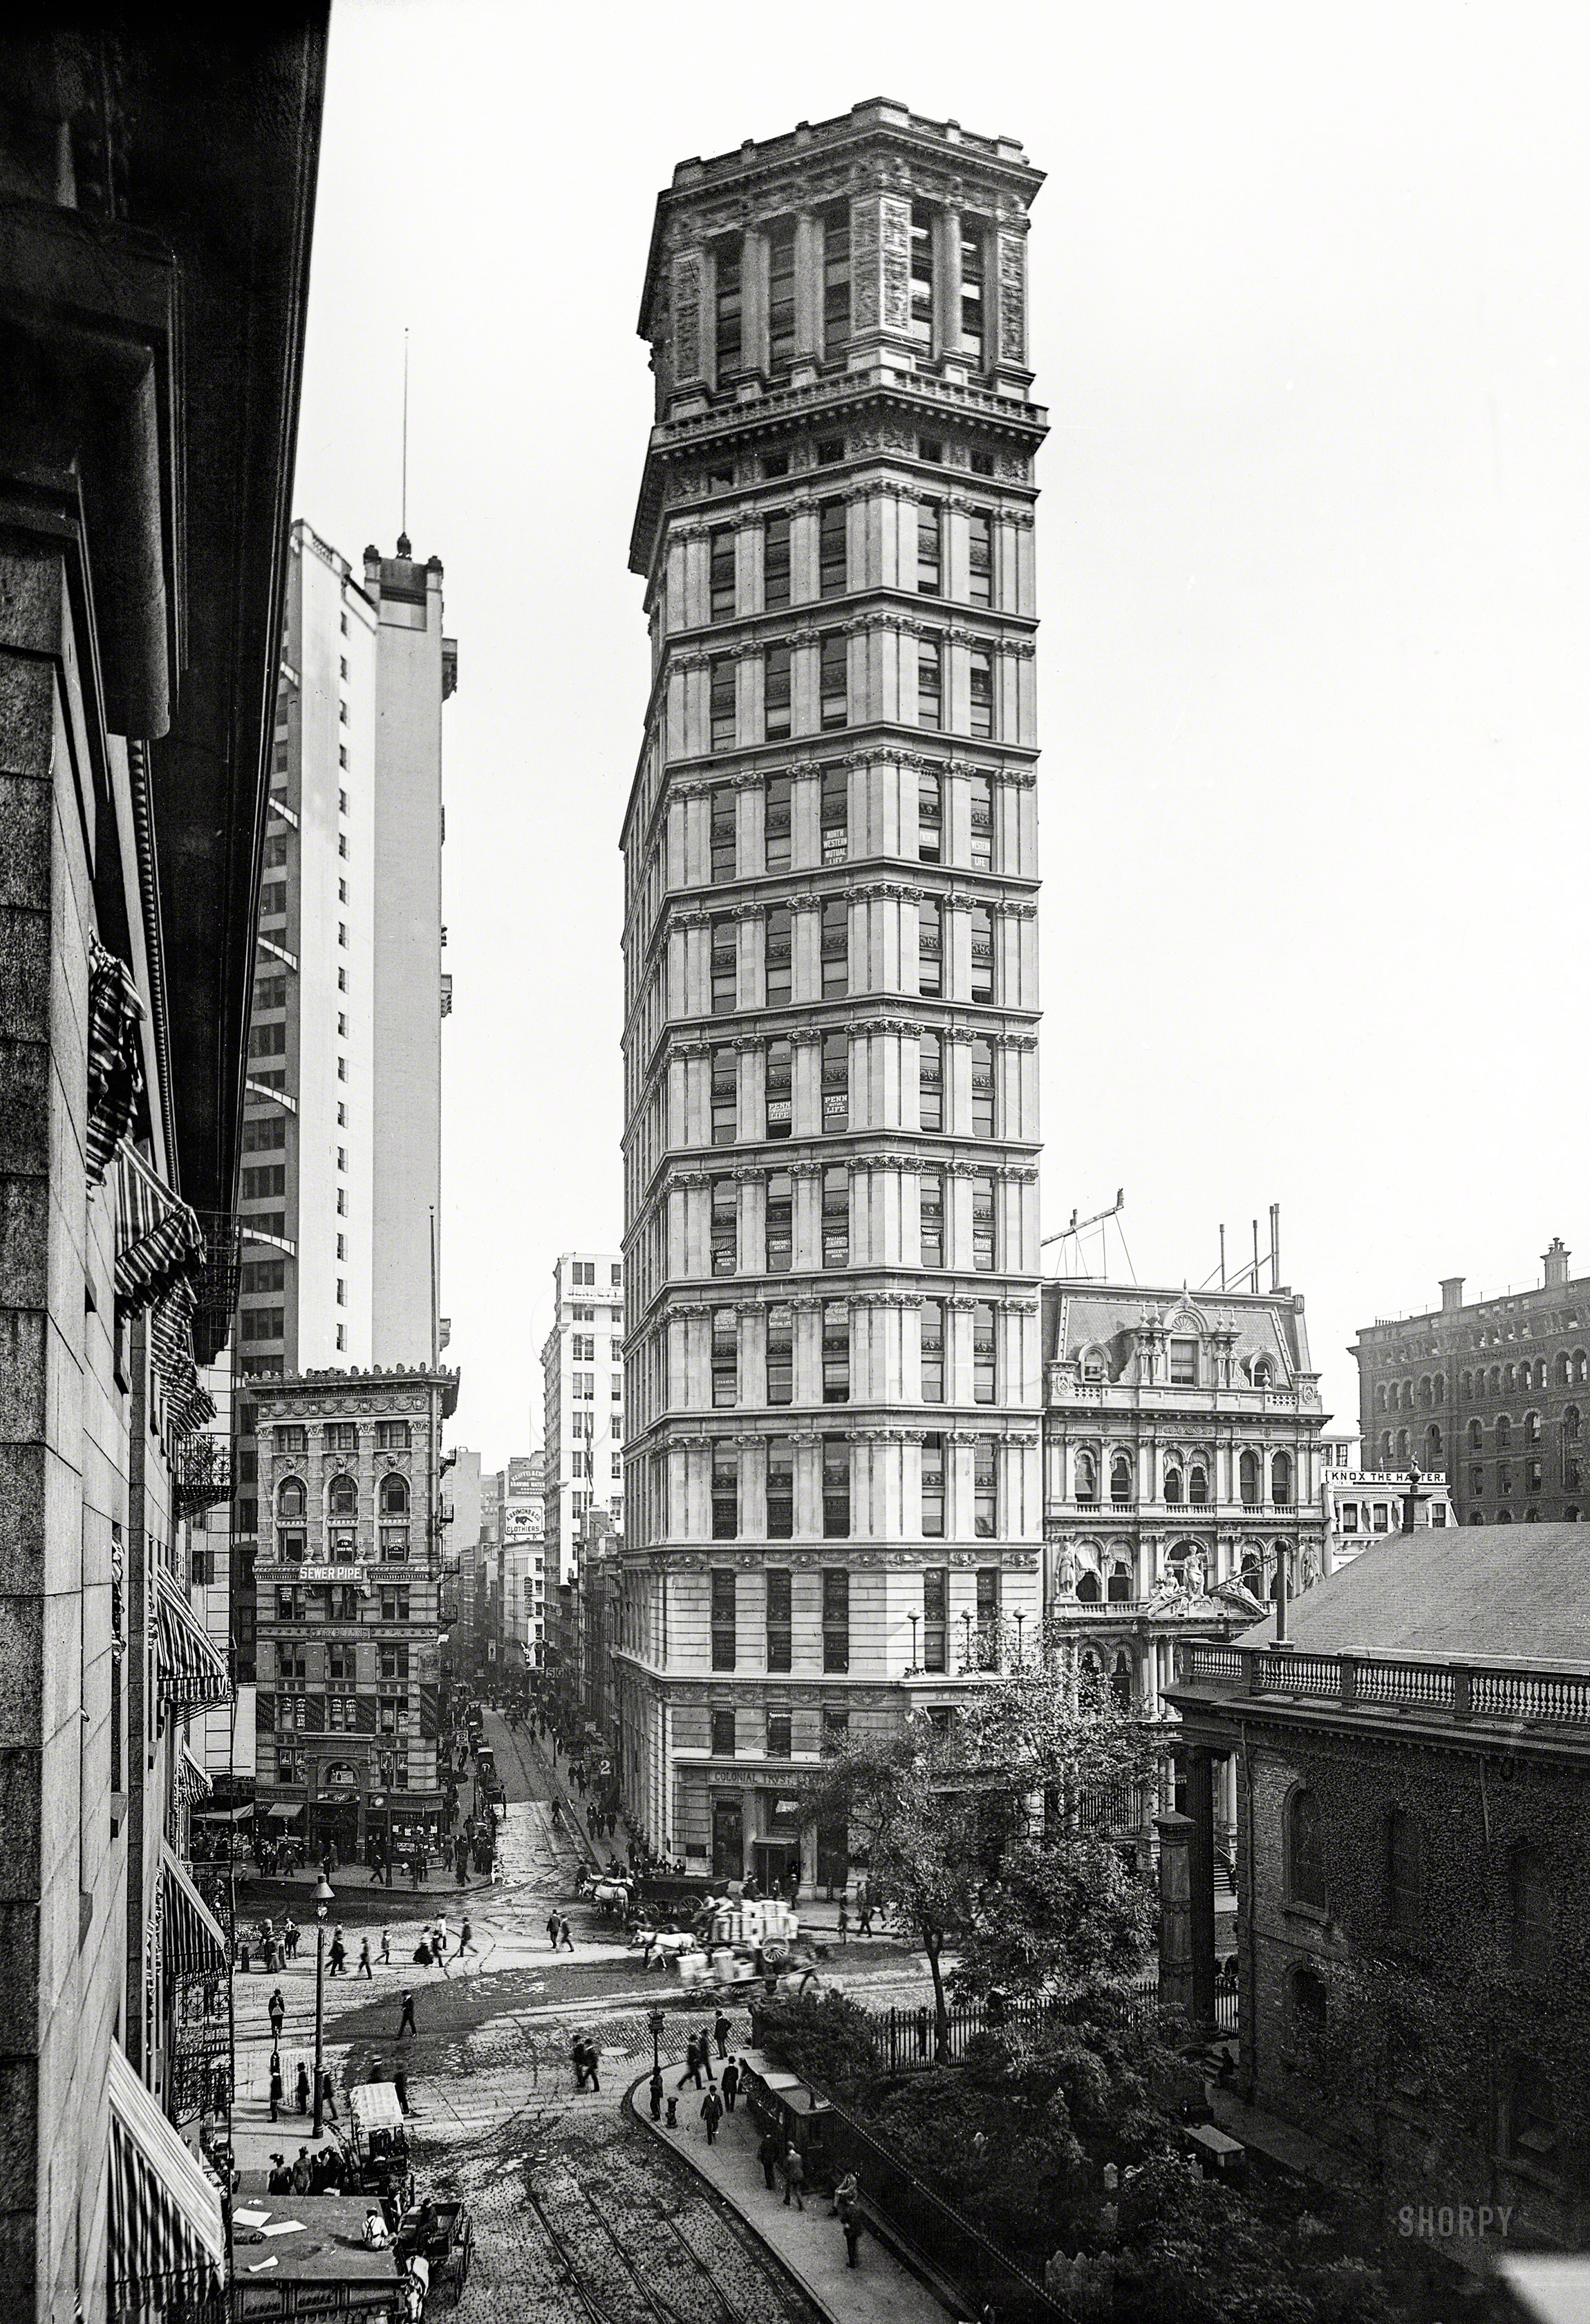 "St. Paul Building, New York, 1901." One of the first structures to be called a skyscraper, the 26-story St. Paul was completed in 1898 and demolished 60 years later. Its neighbor to the left, the 28-floor Park Row Building, completed in 1899, still stands. 8x10 inch glass negative, Detroit Publishing Co. View full size.